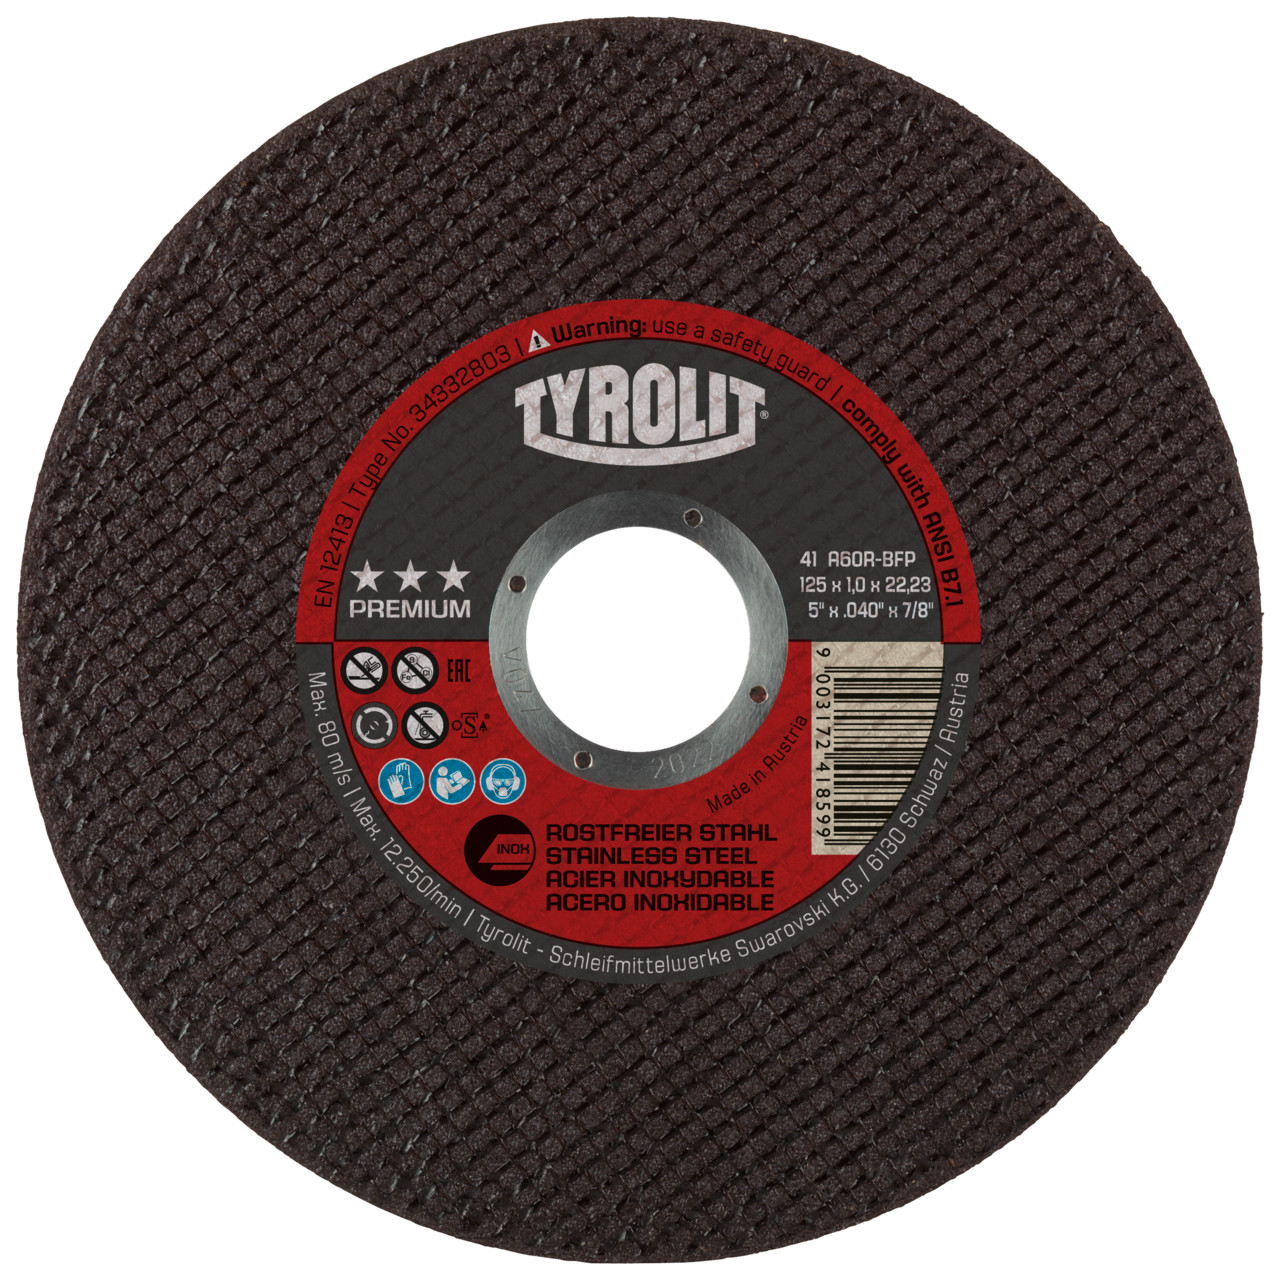 TYROLIT cut-off wheels DxDxH 125x0.75x22.23 Super-thin cut-off wheels for stainless steel, shape: 41 - straight version, Art. 34332801